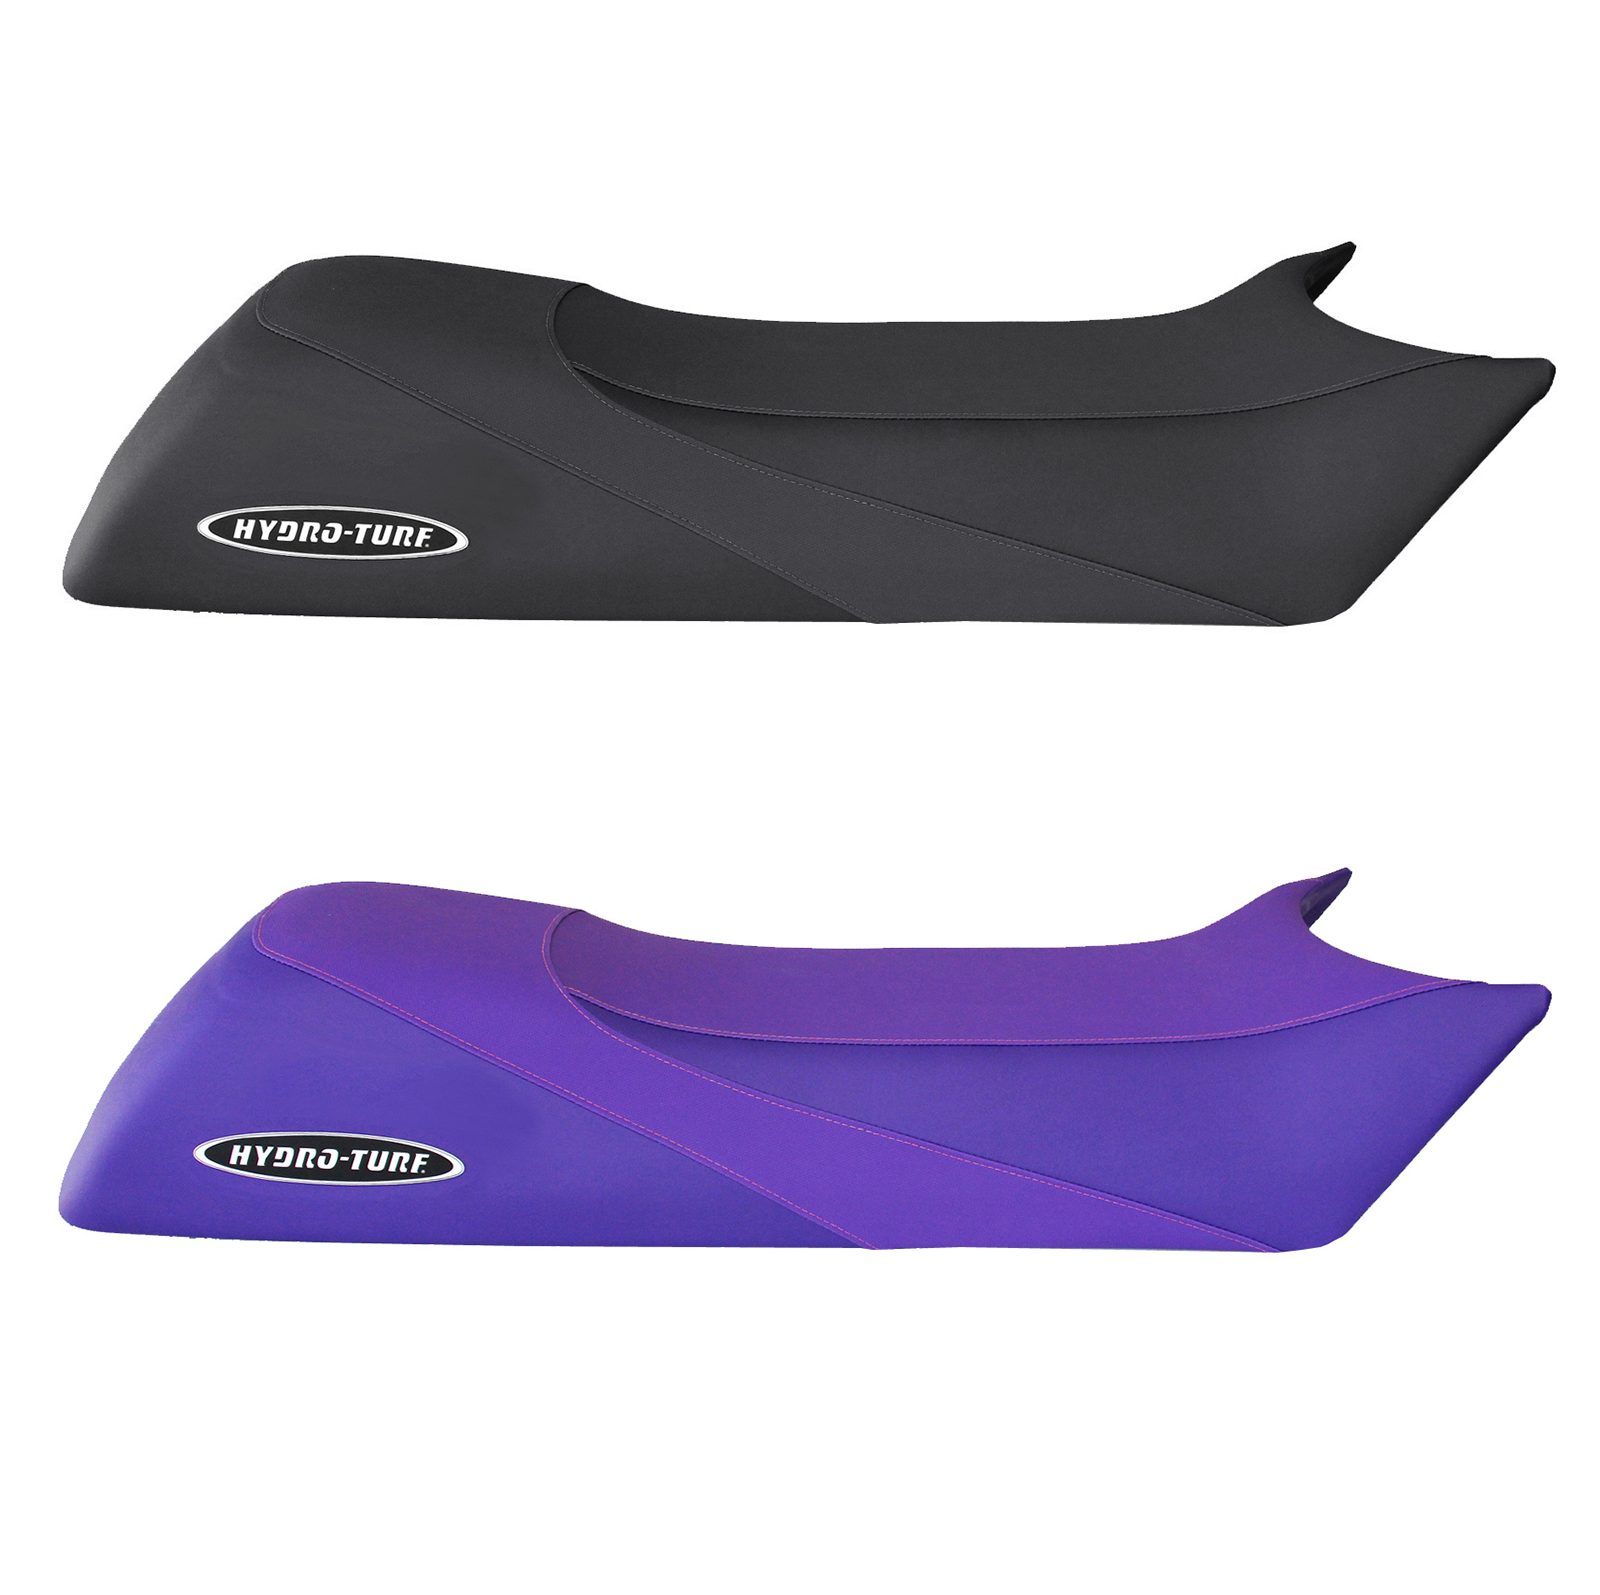 Hydro-Turf seat cover for WaveRunner III  Colorway